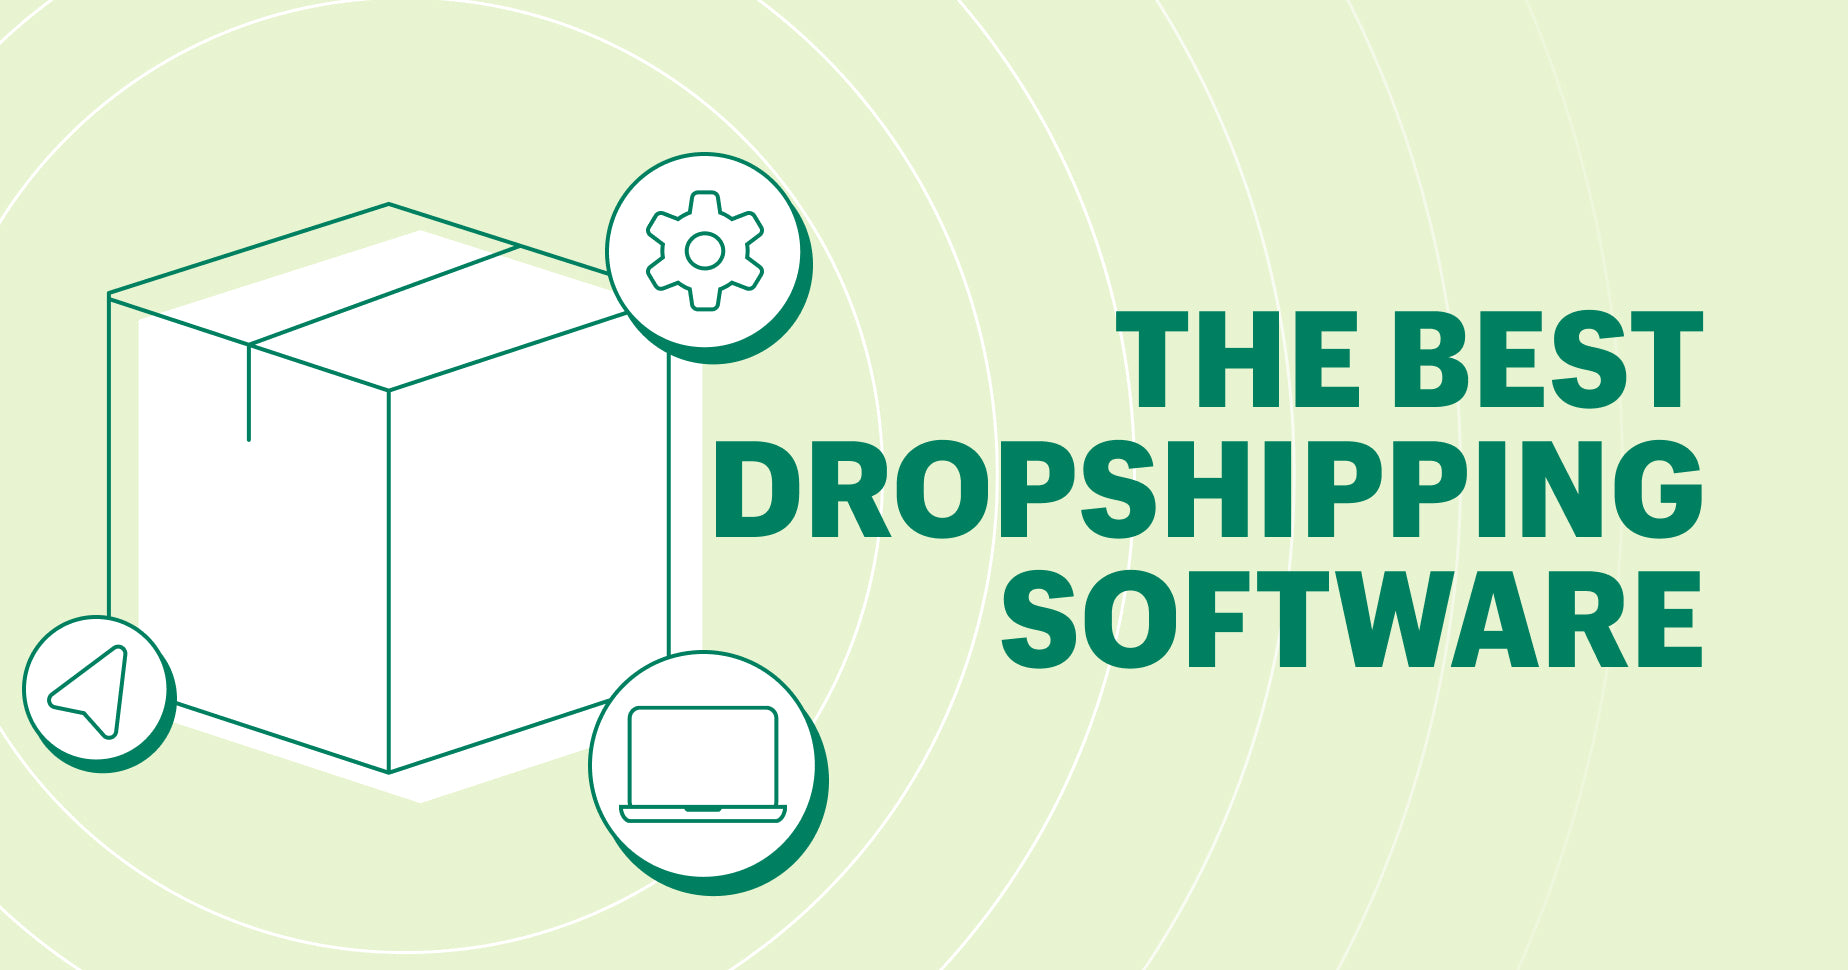 Discounted dropshipping solutions